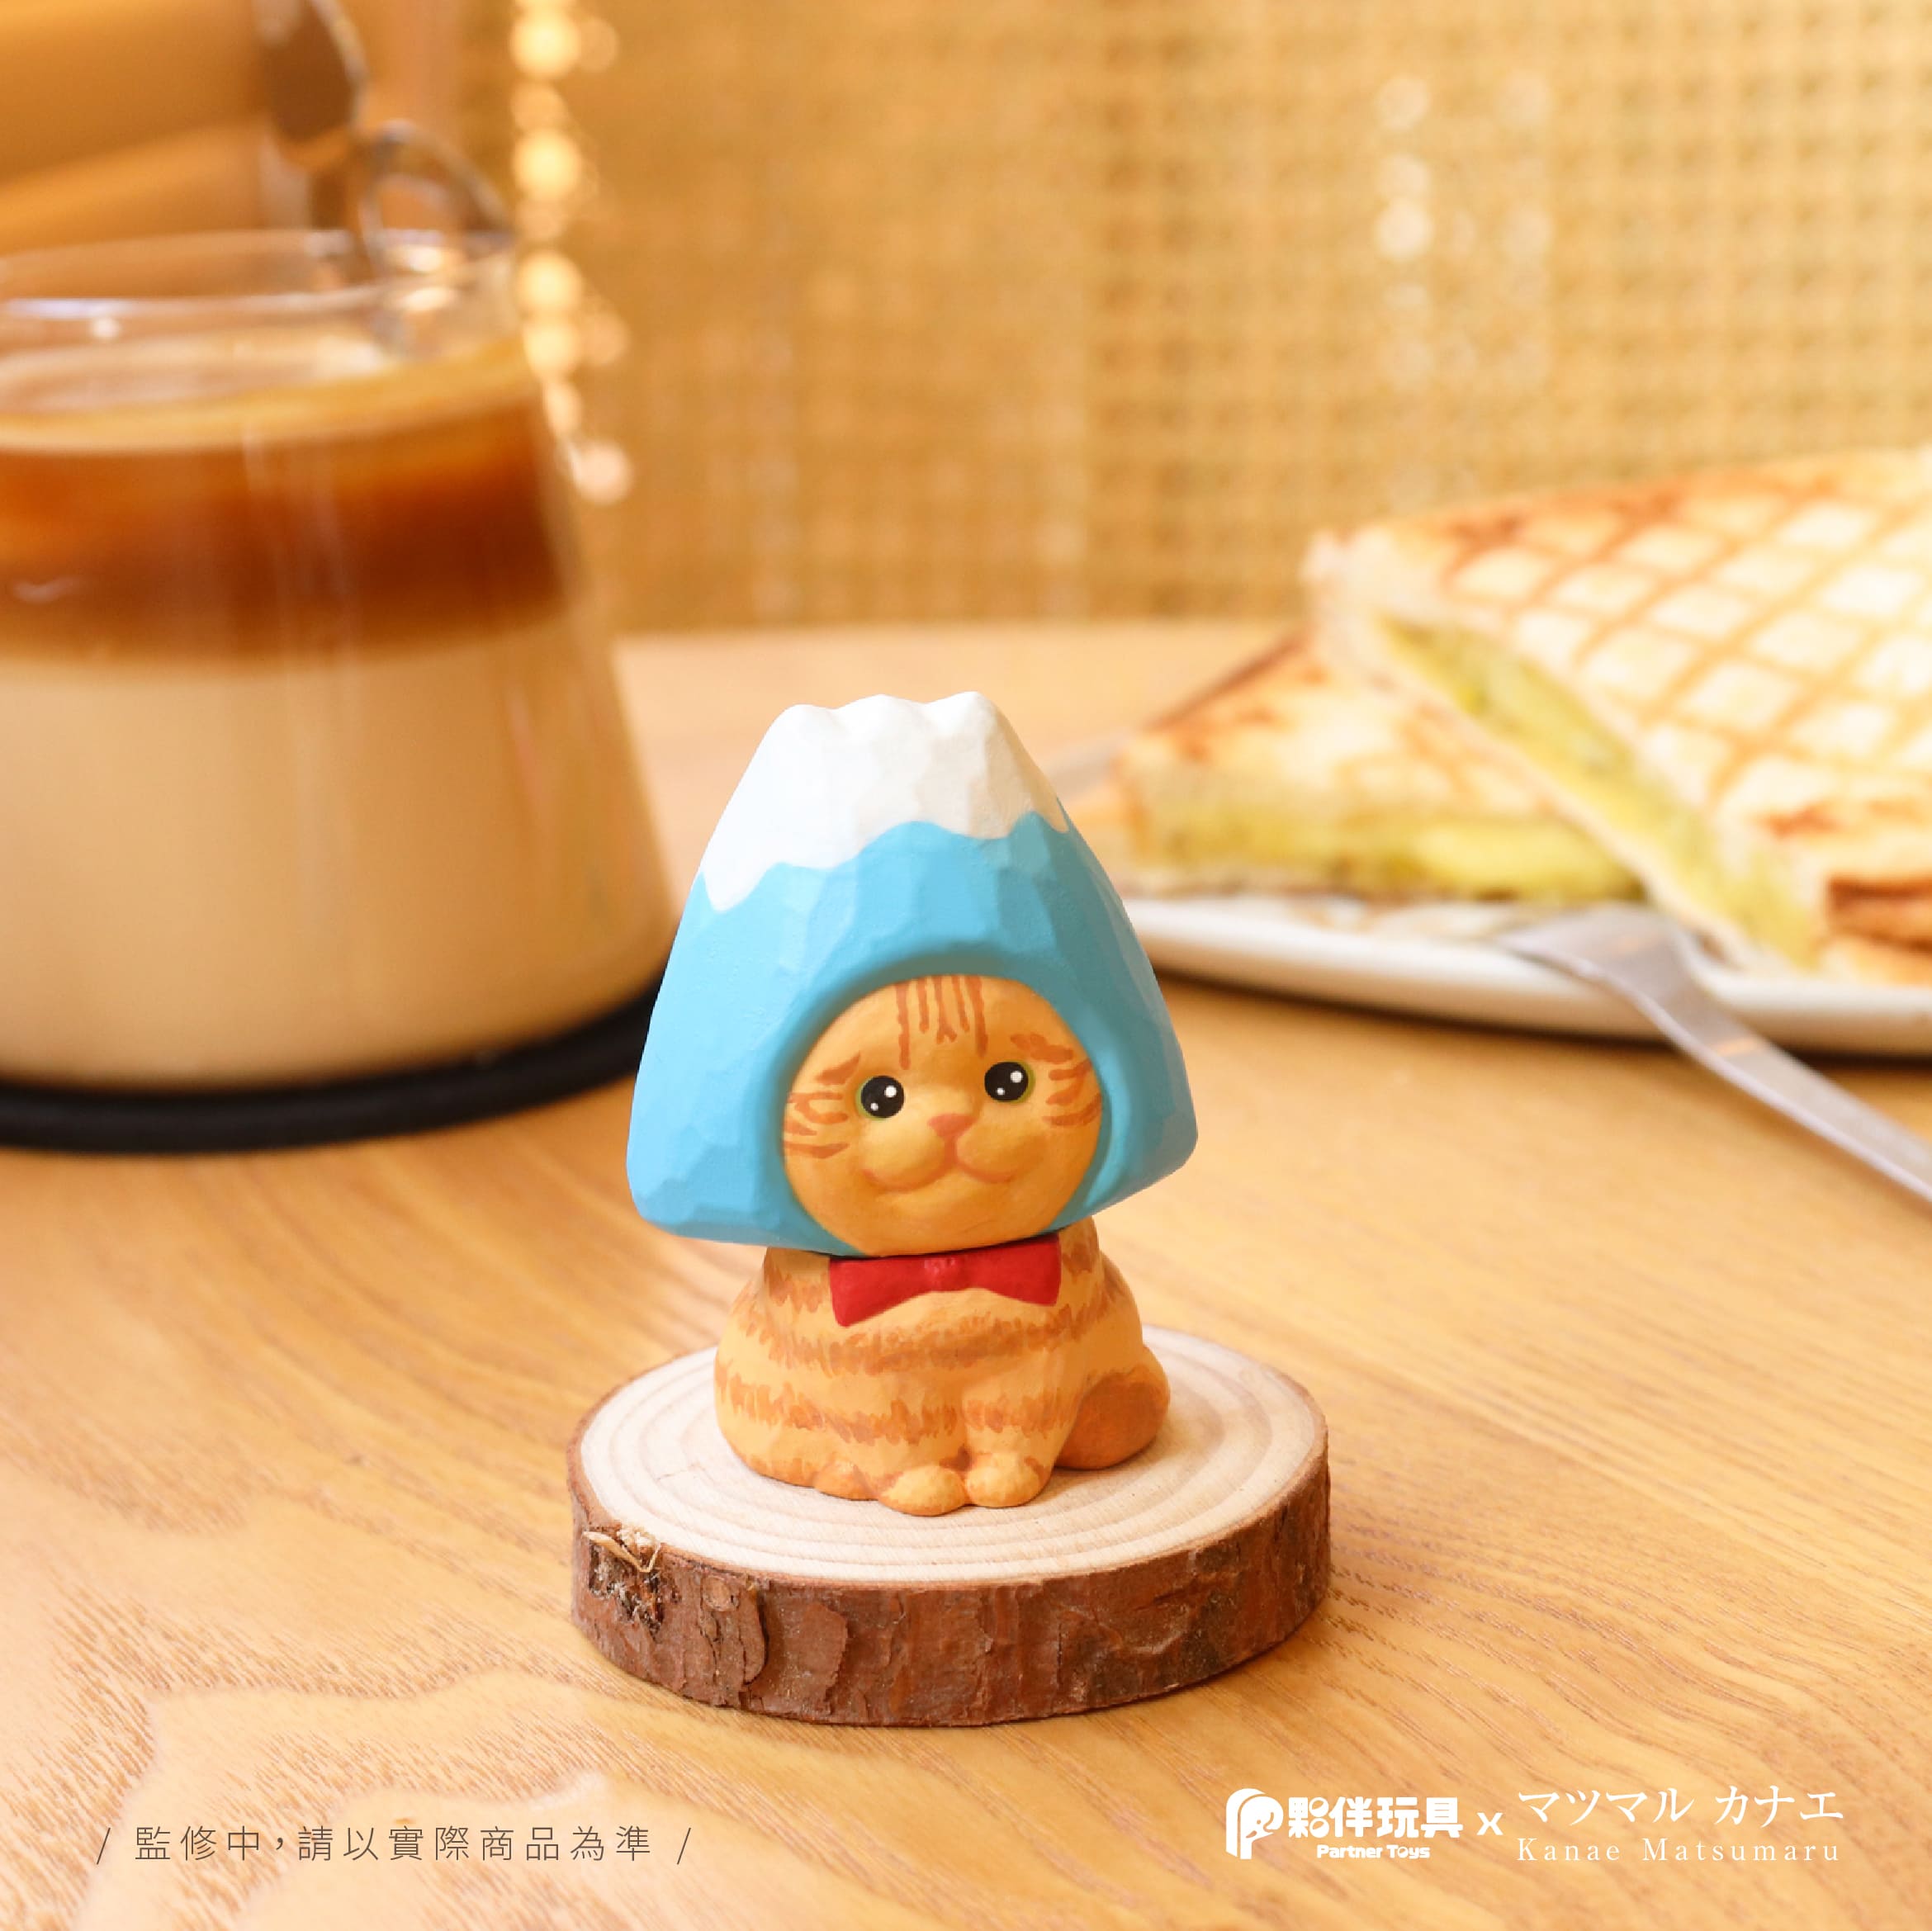 Matsu's cats Blind Box Series: Cat figurine on wood slice with snack and drink, ceramic cat with hat, and more.